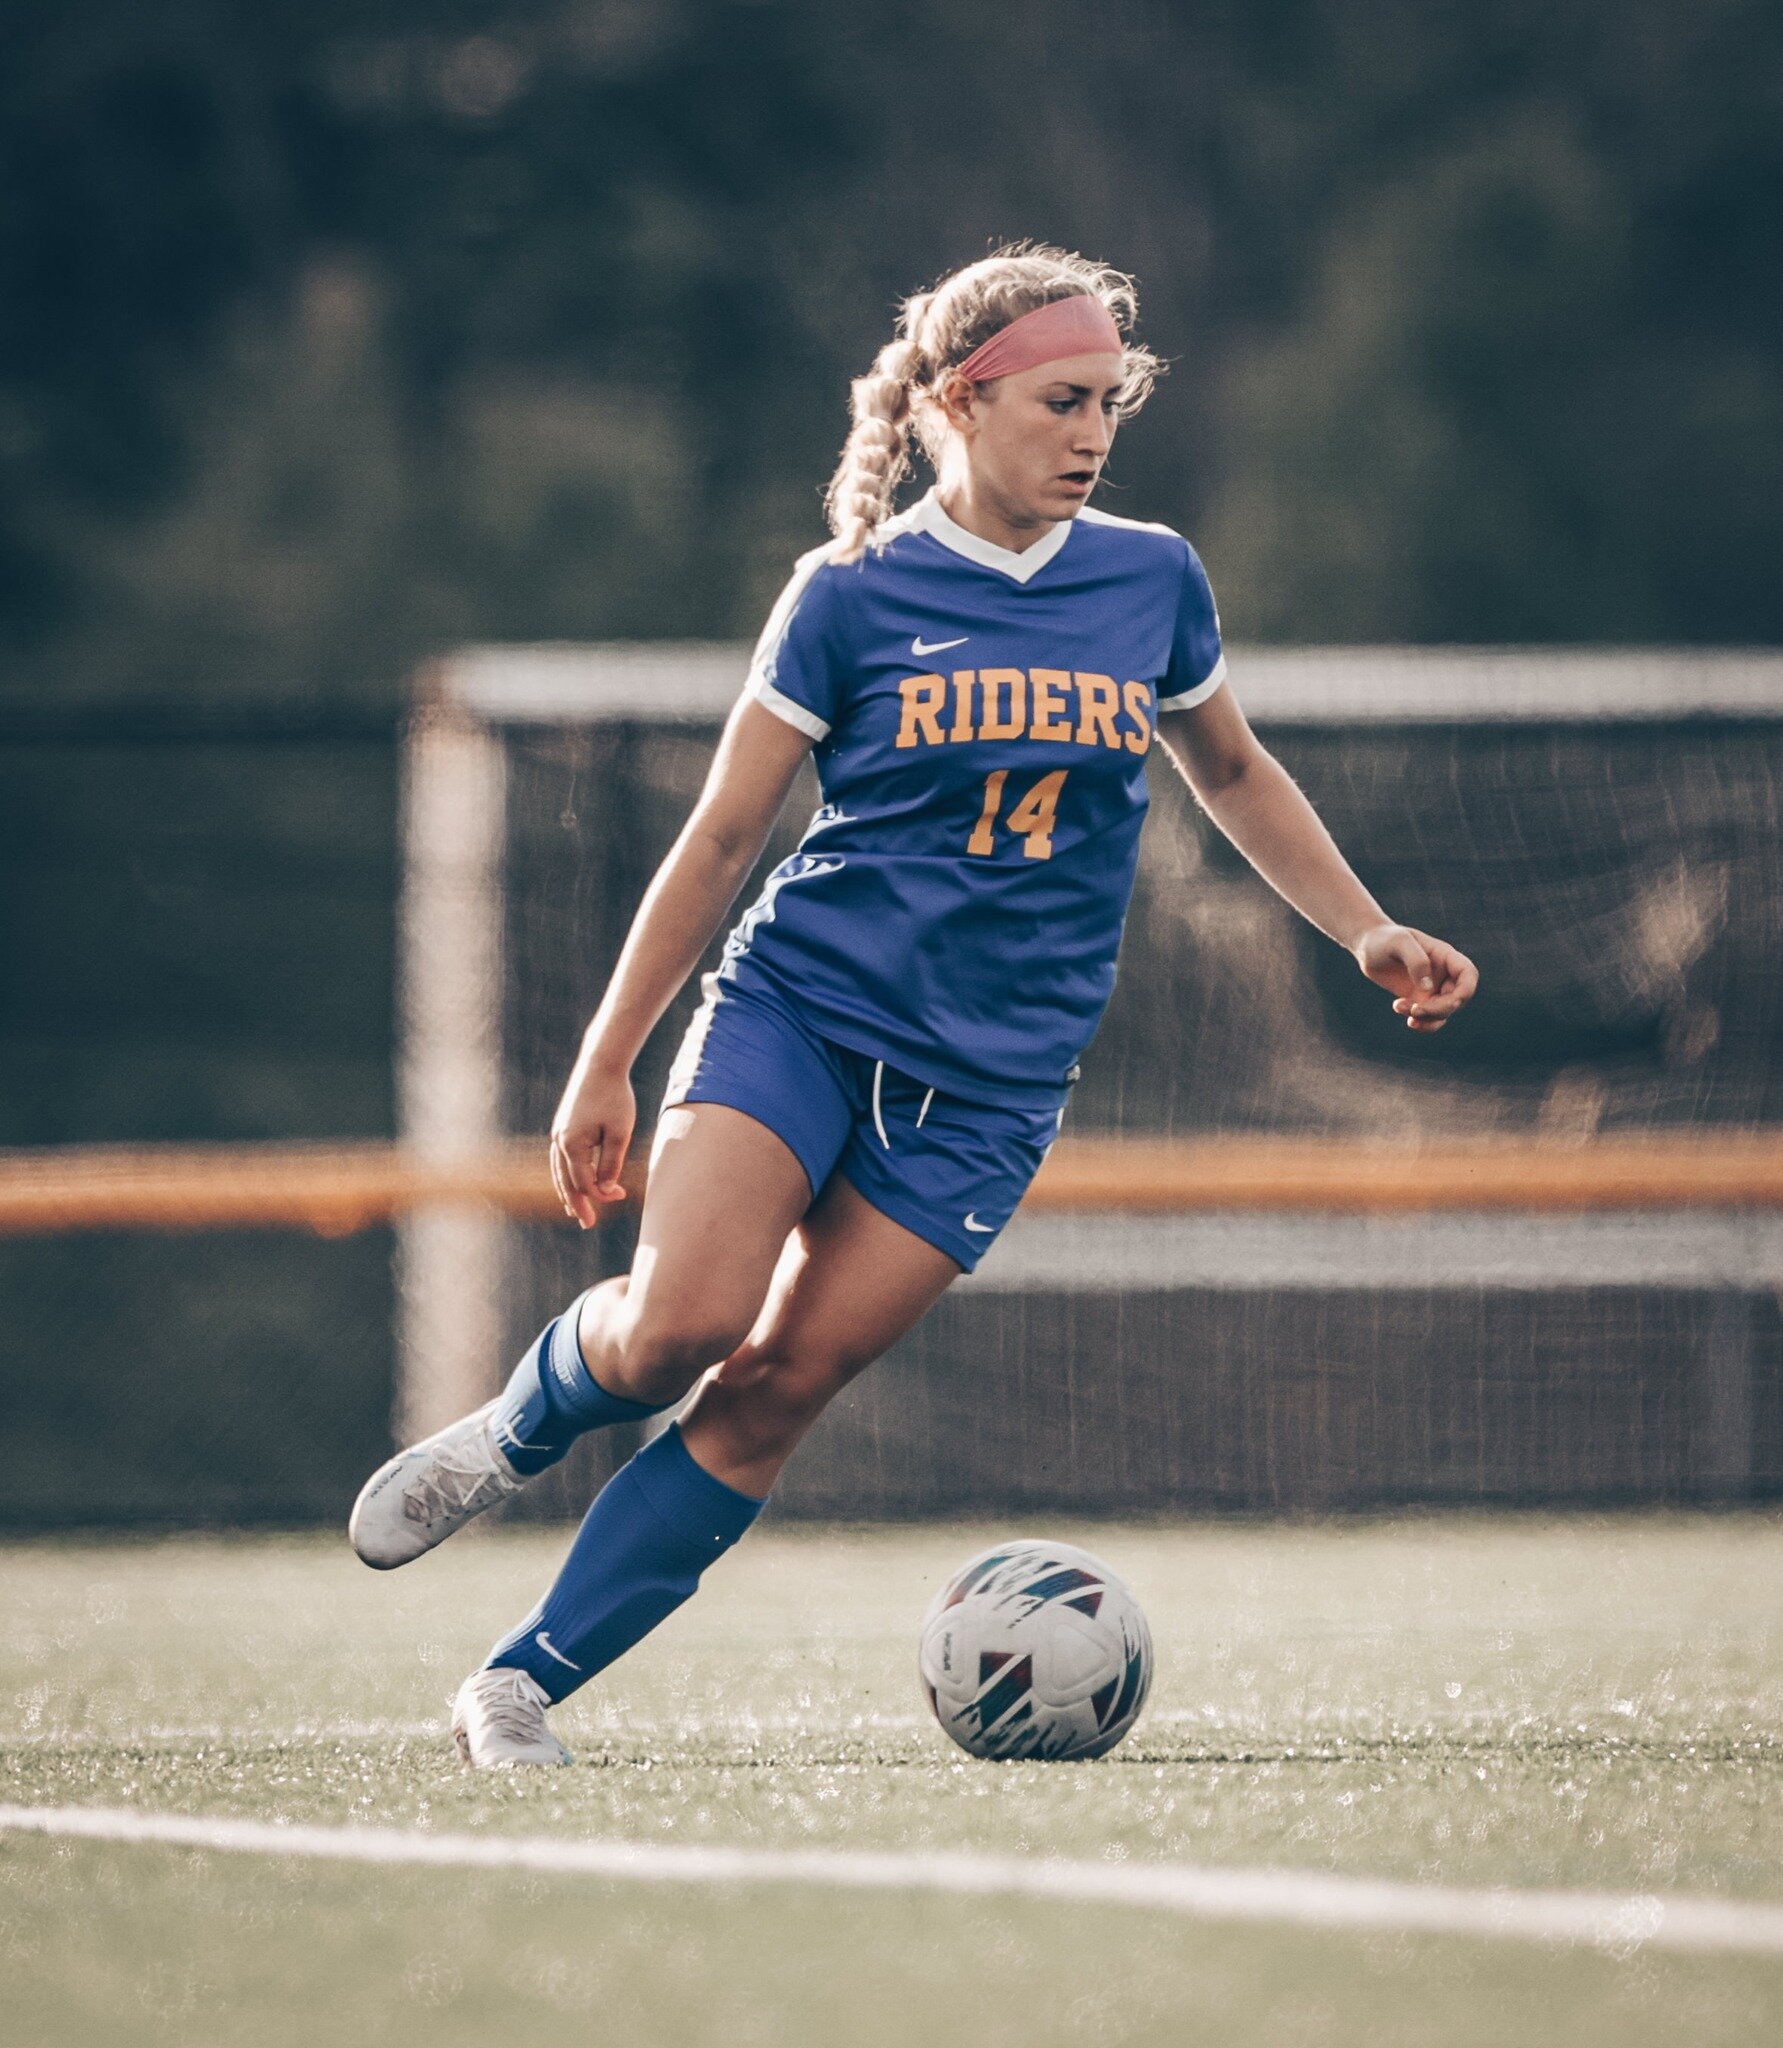 CR VS Padua Girl's Soccer match on April 25th. 

Currently, taking bookings for games up until the playoffs

Gallery: https://otmphotos.pic-time.com/-CRVSPaduaGirlsSoccer